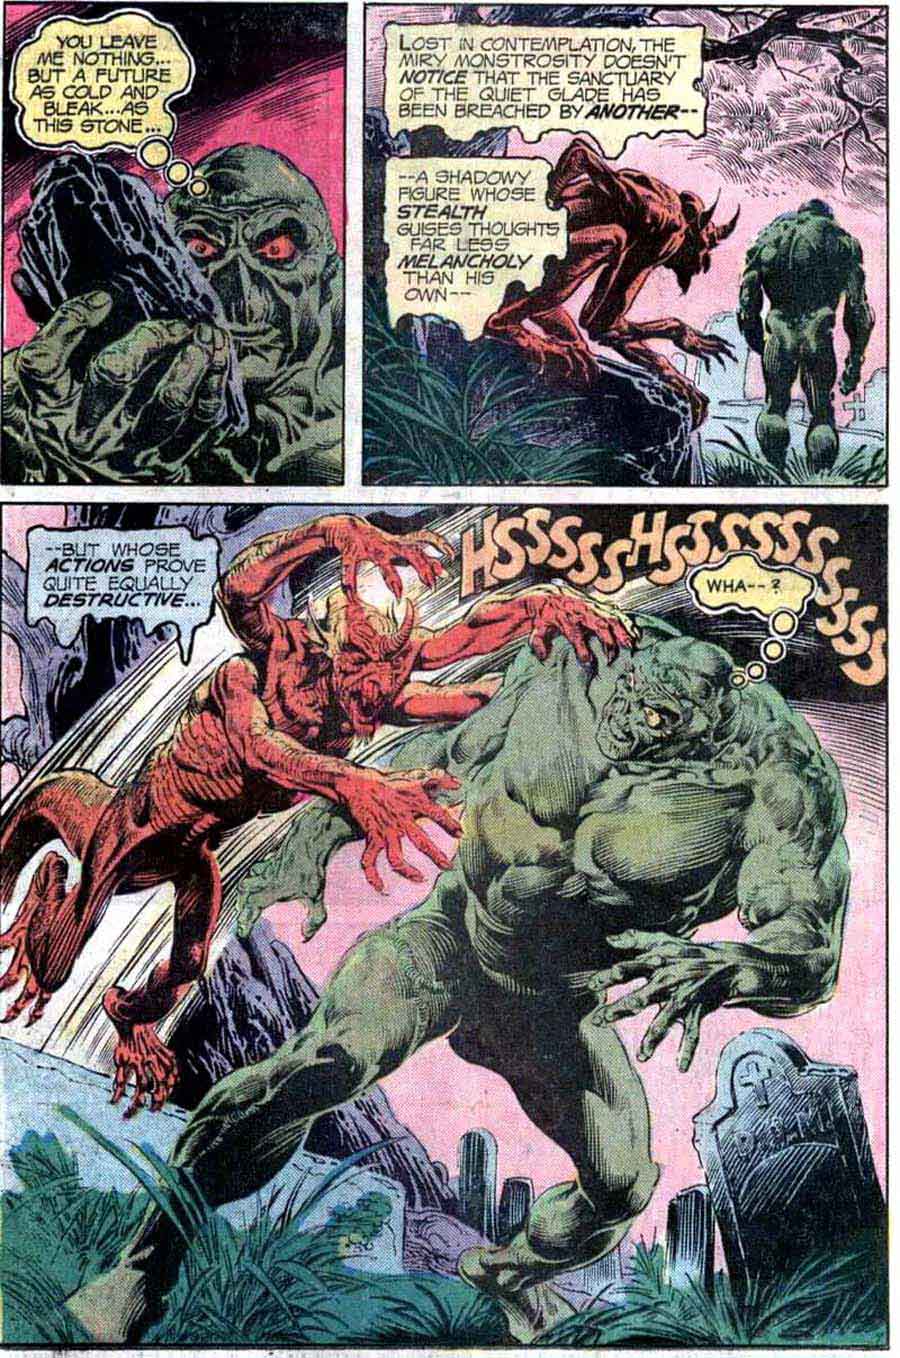 Swamp Thing v1 #18 1970s bronze age dc comic book page art by Nestor Redondo